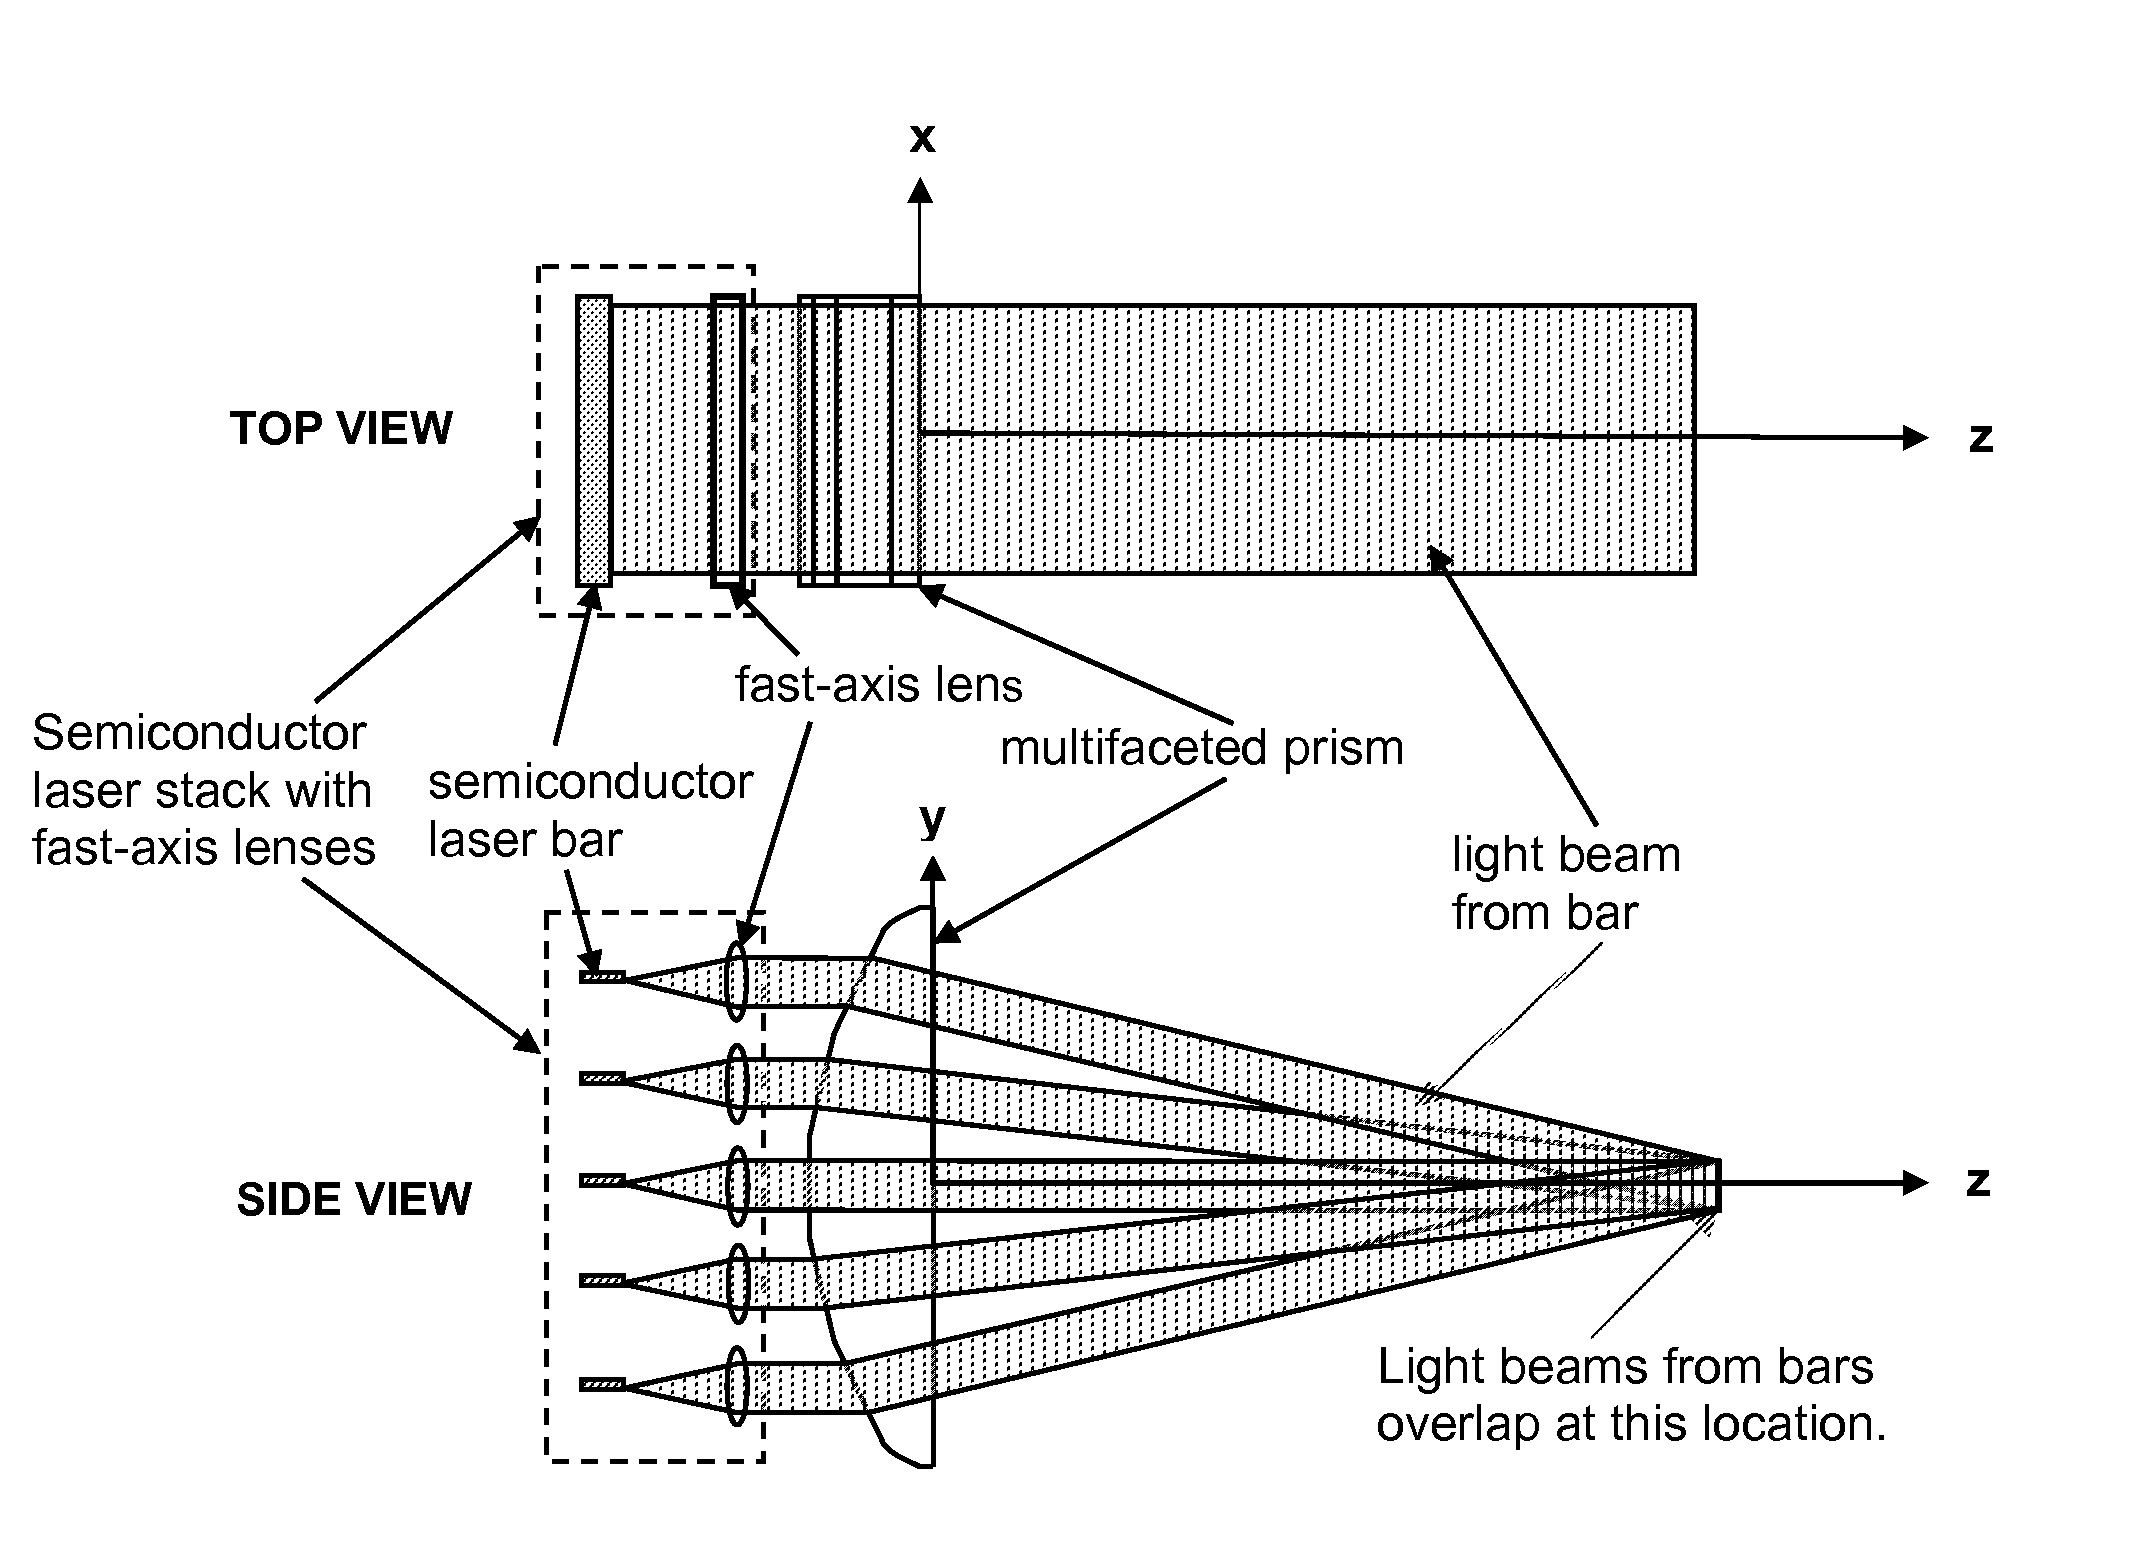 Multifaceted prism to cause the overlap of beams from a stack of diode laser bars